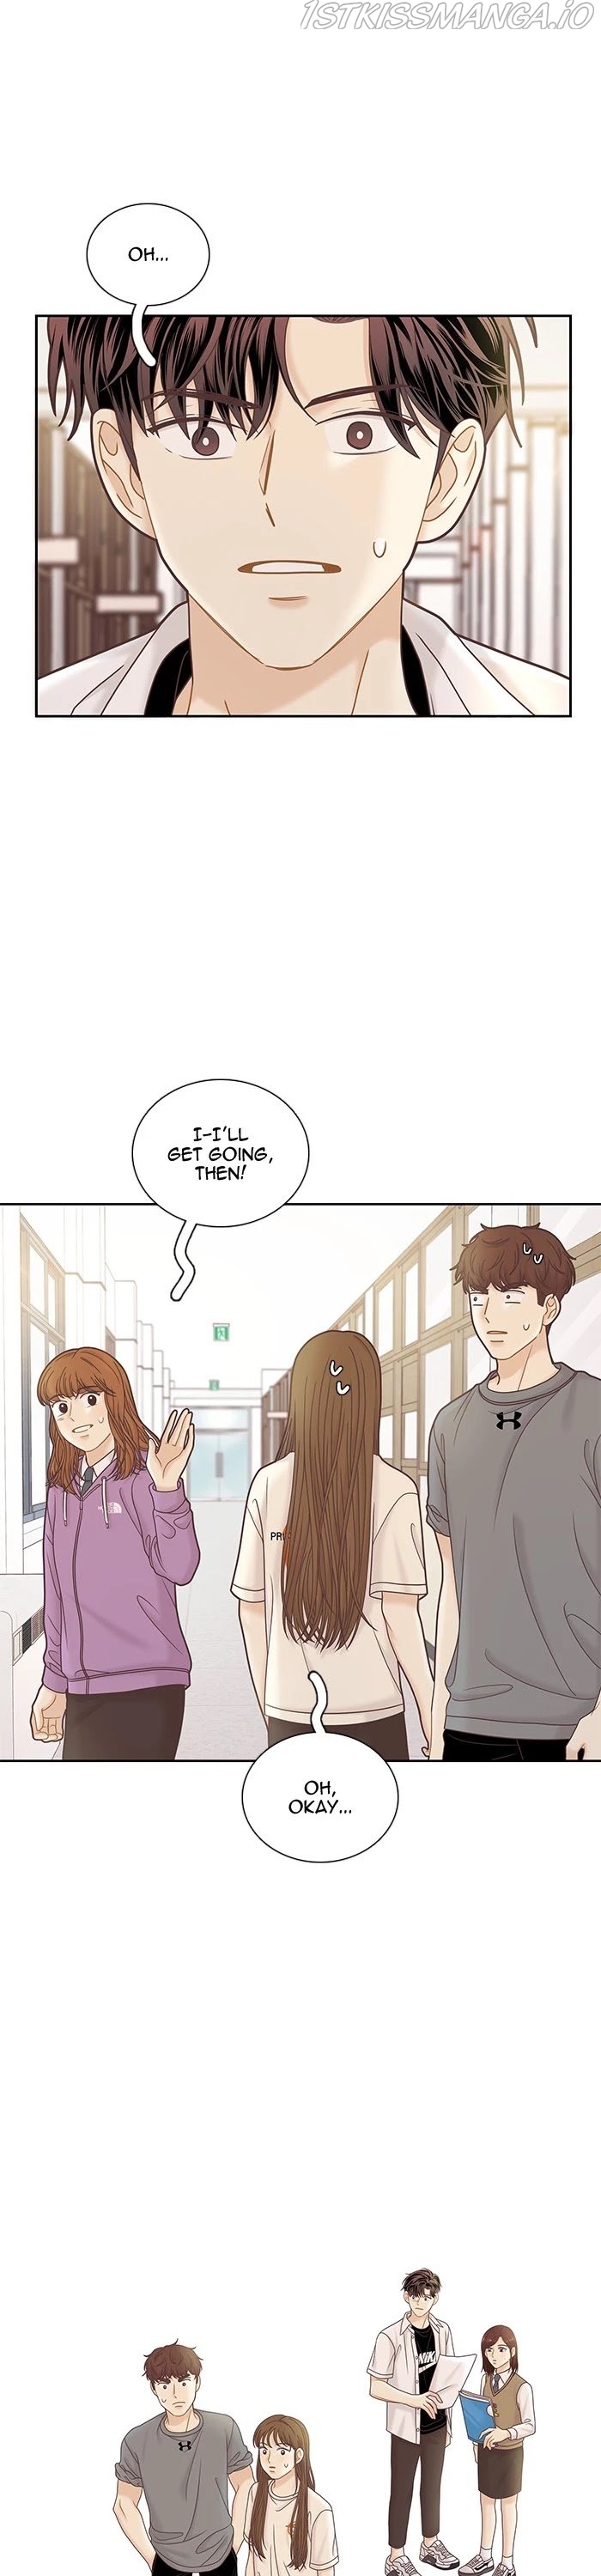 Girl’s World ( World of Girl ) Chapter 286 - Page 1